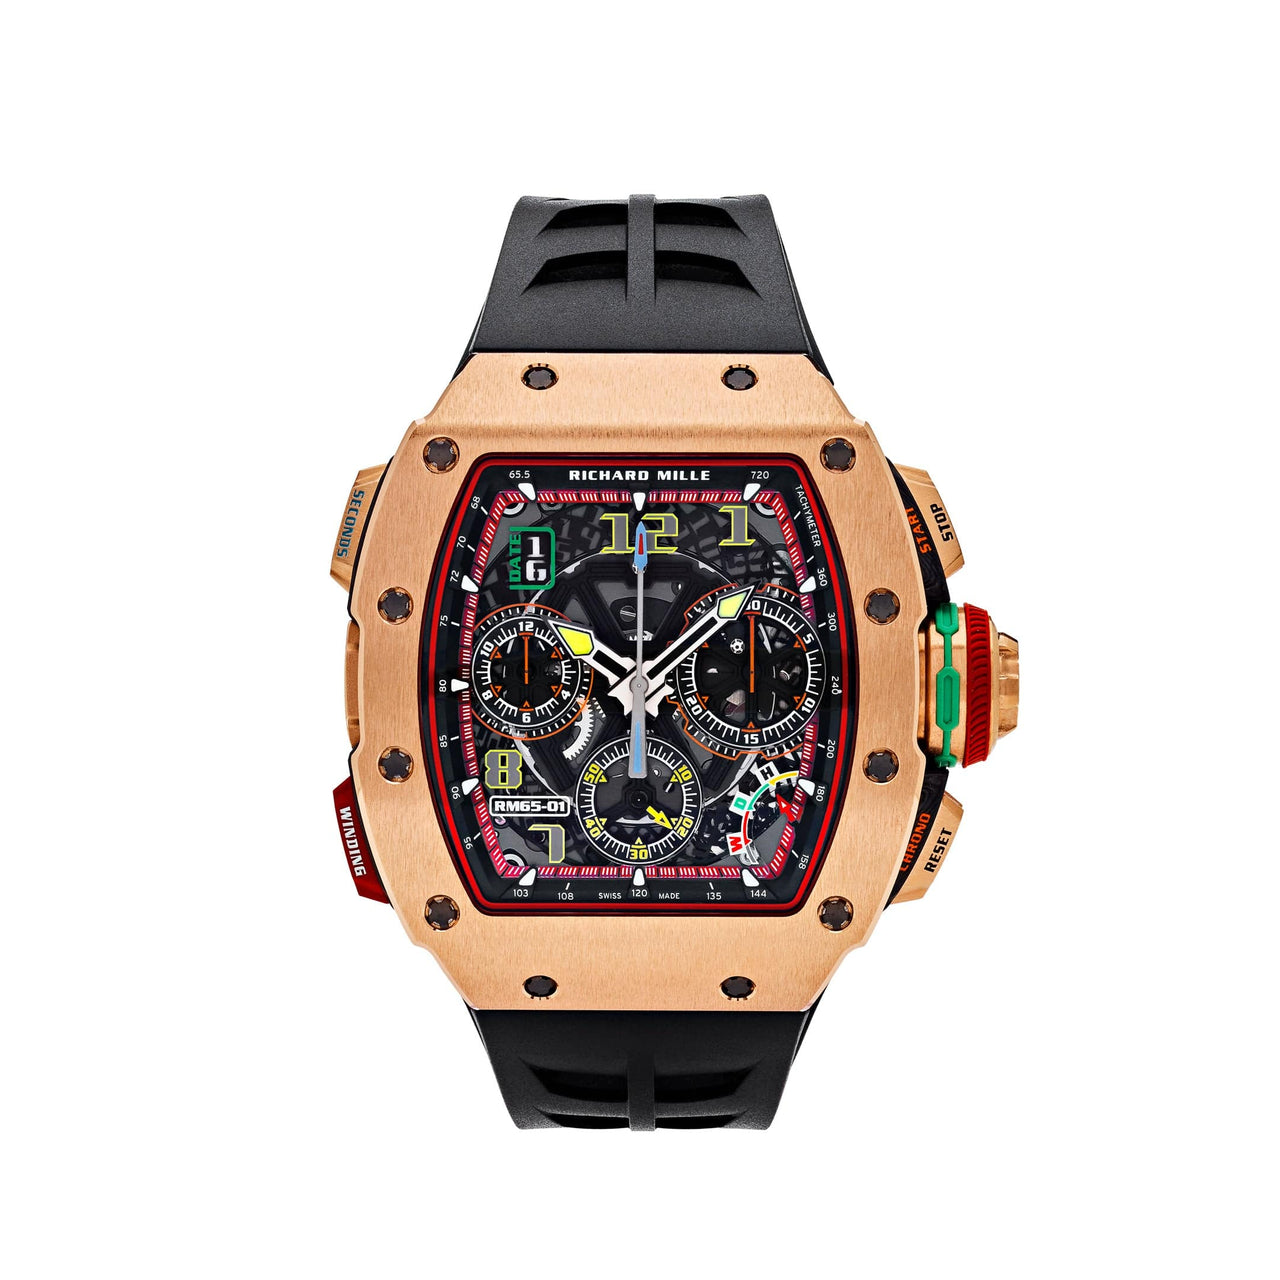 RM 65-01 Automatic Chronograph Full Rose Gold